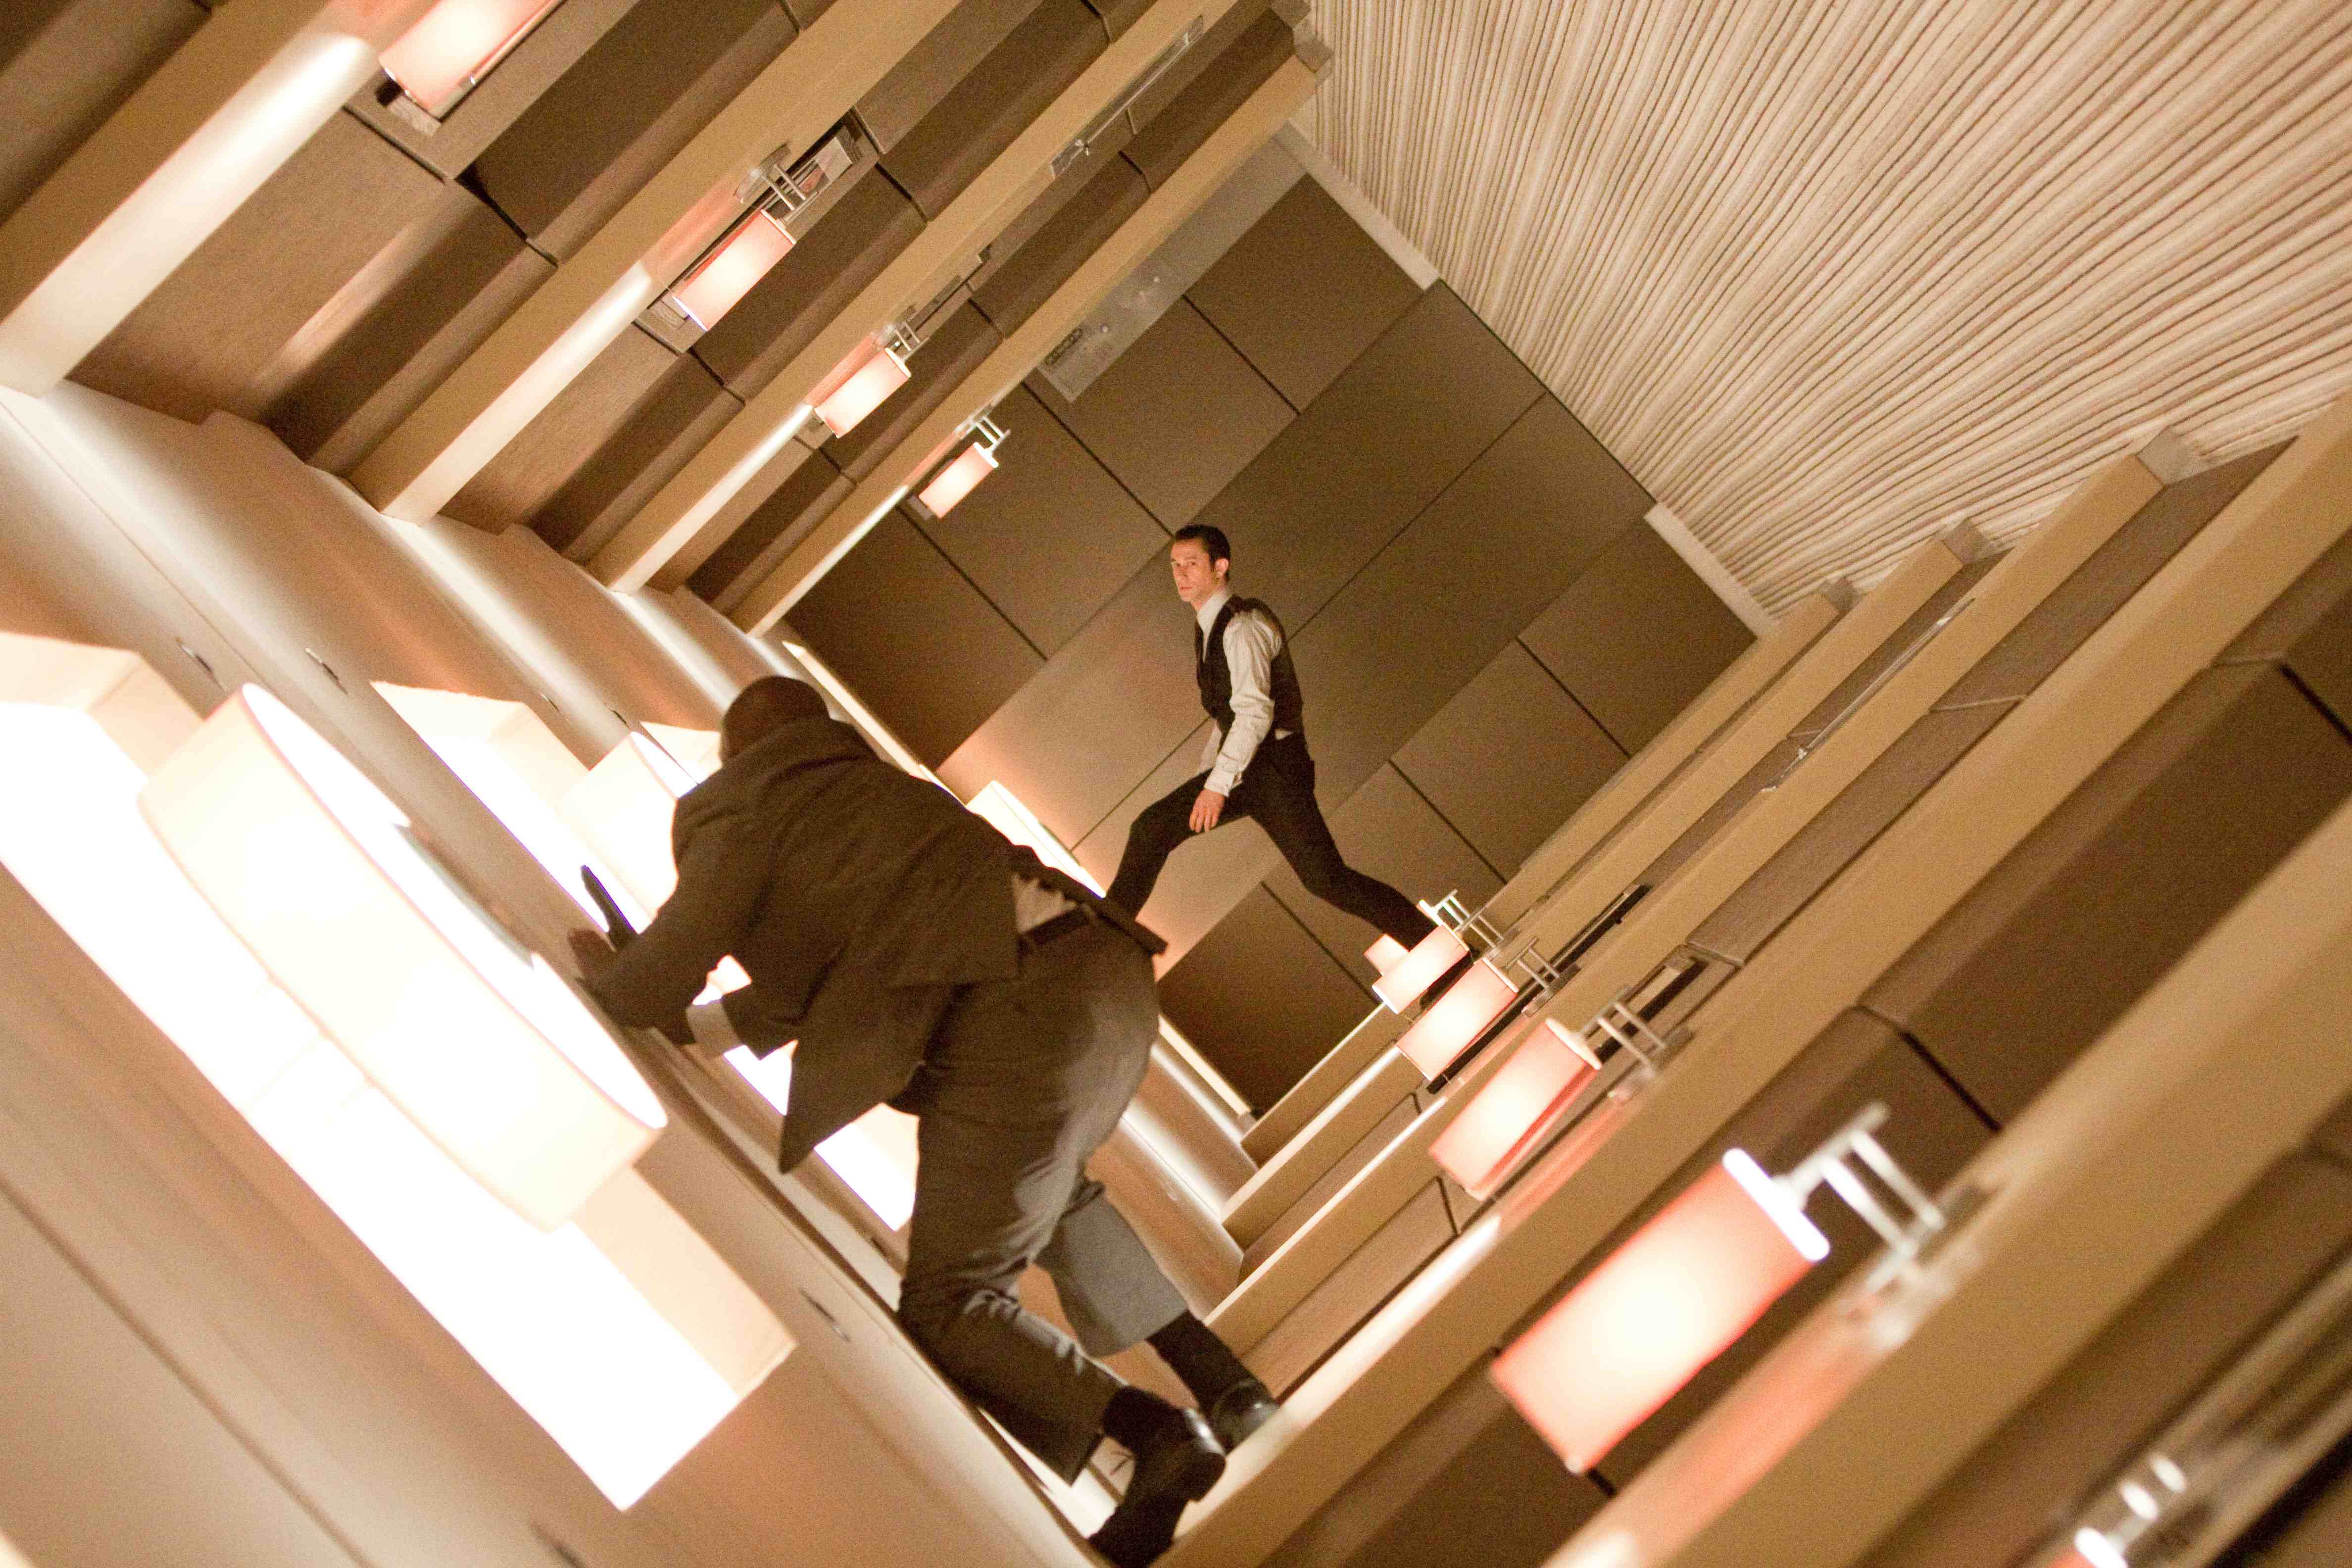 two characters from the film 'Inception' walking in a dream world where space folds back on itself